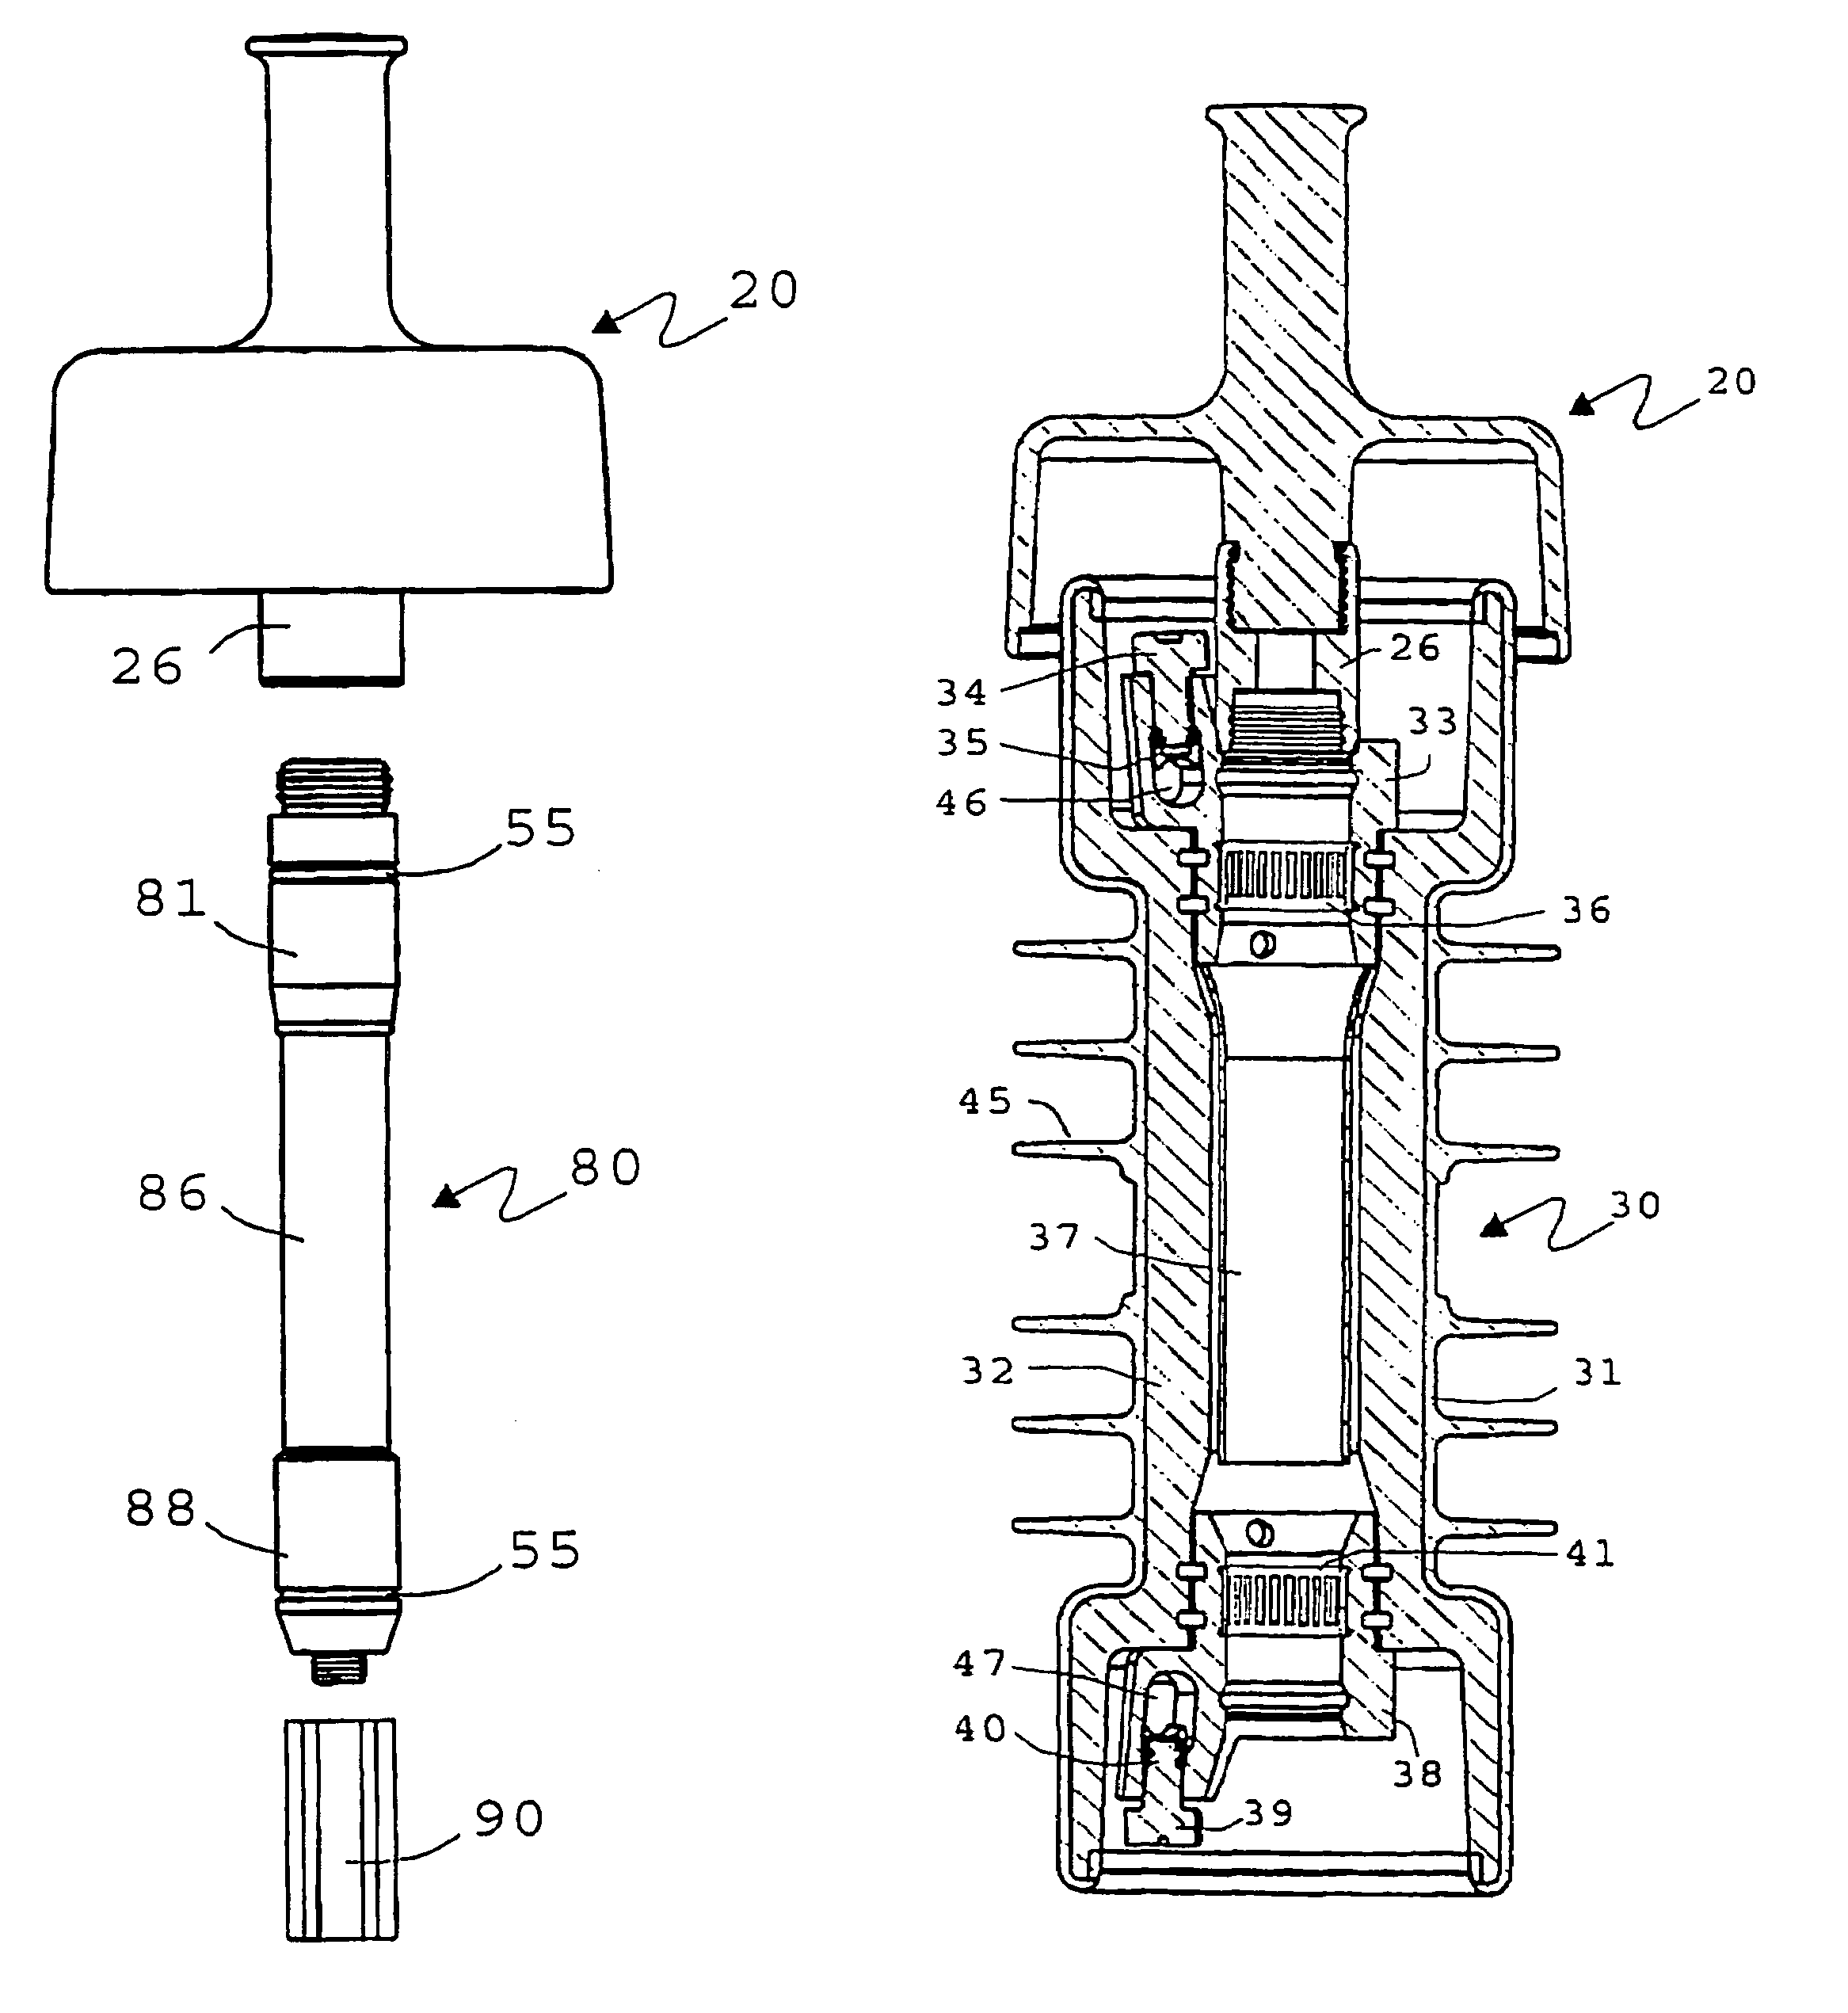 Enclosed insulator assembly for high-voltage distribution systems